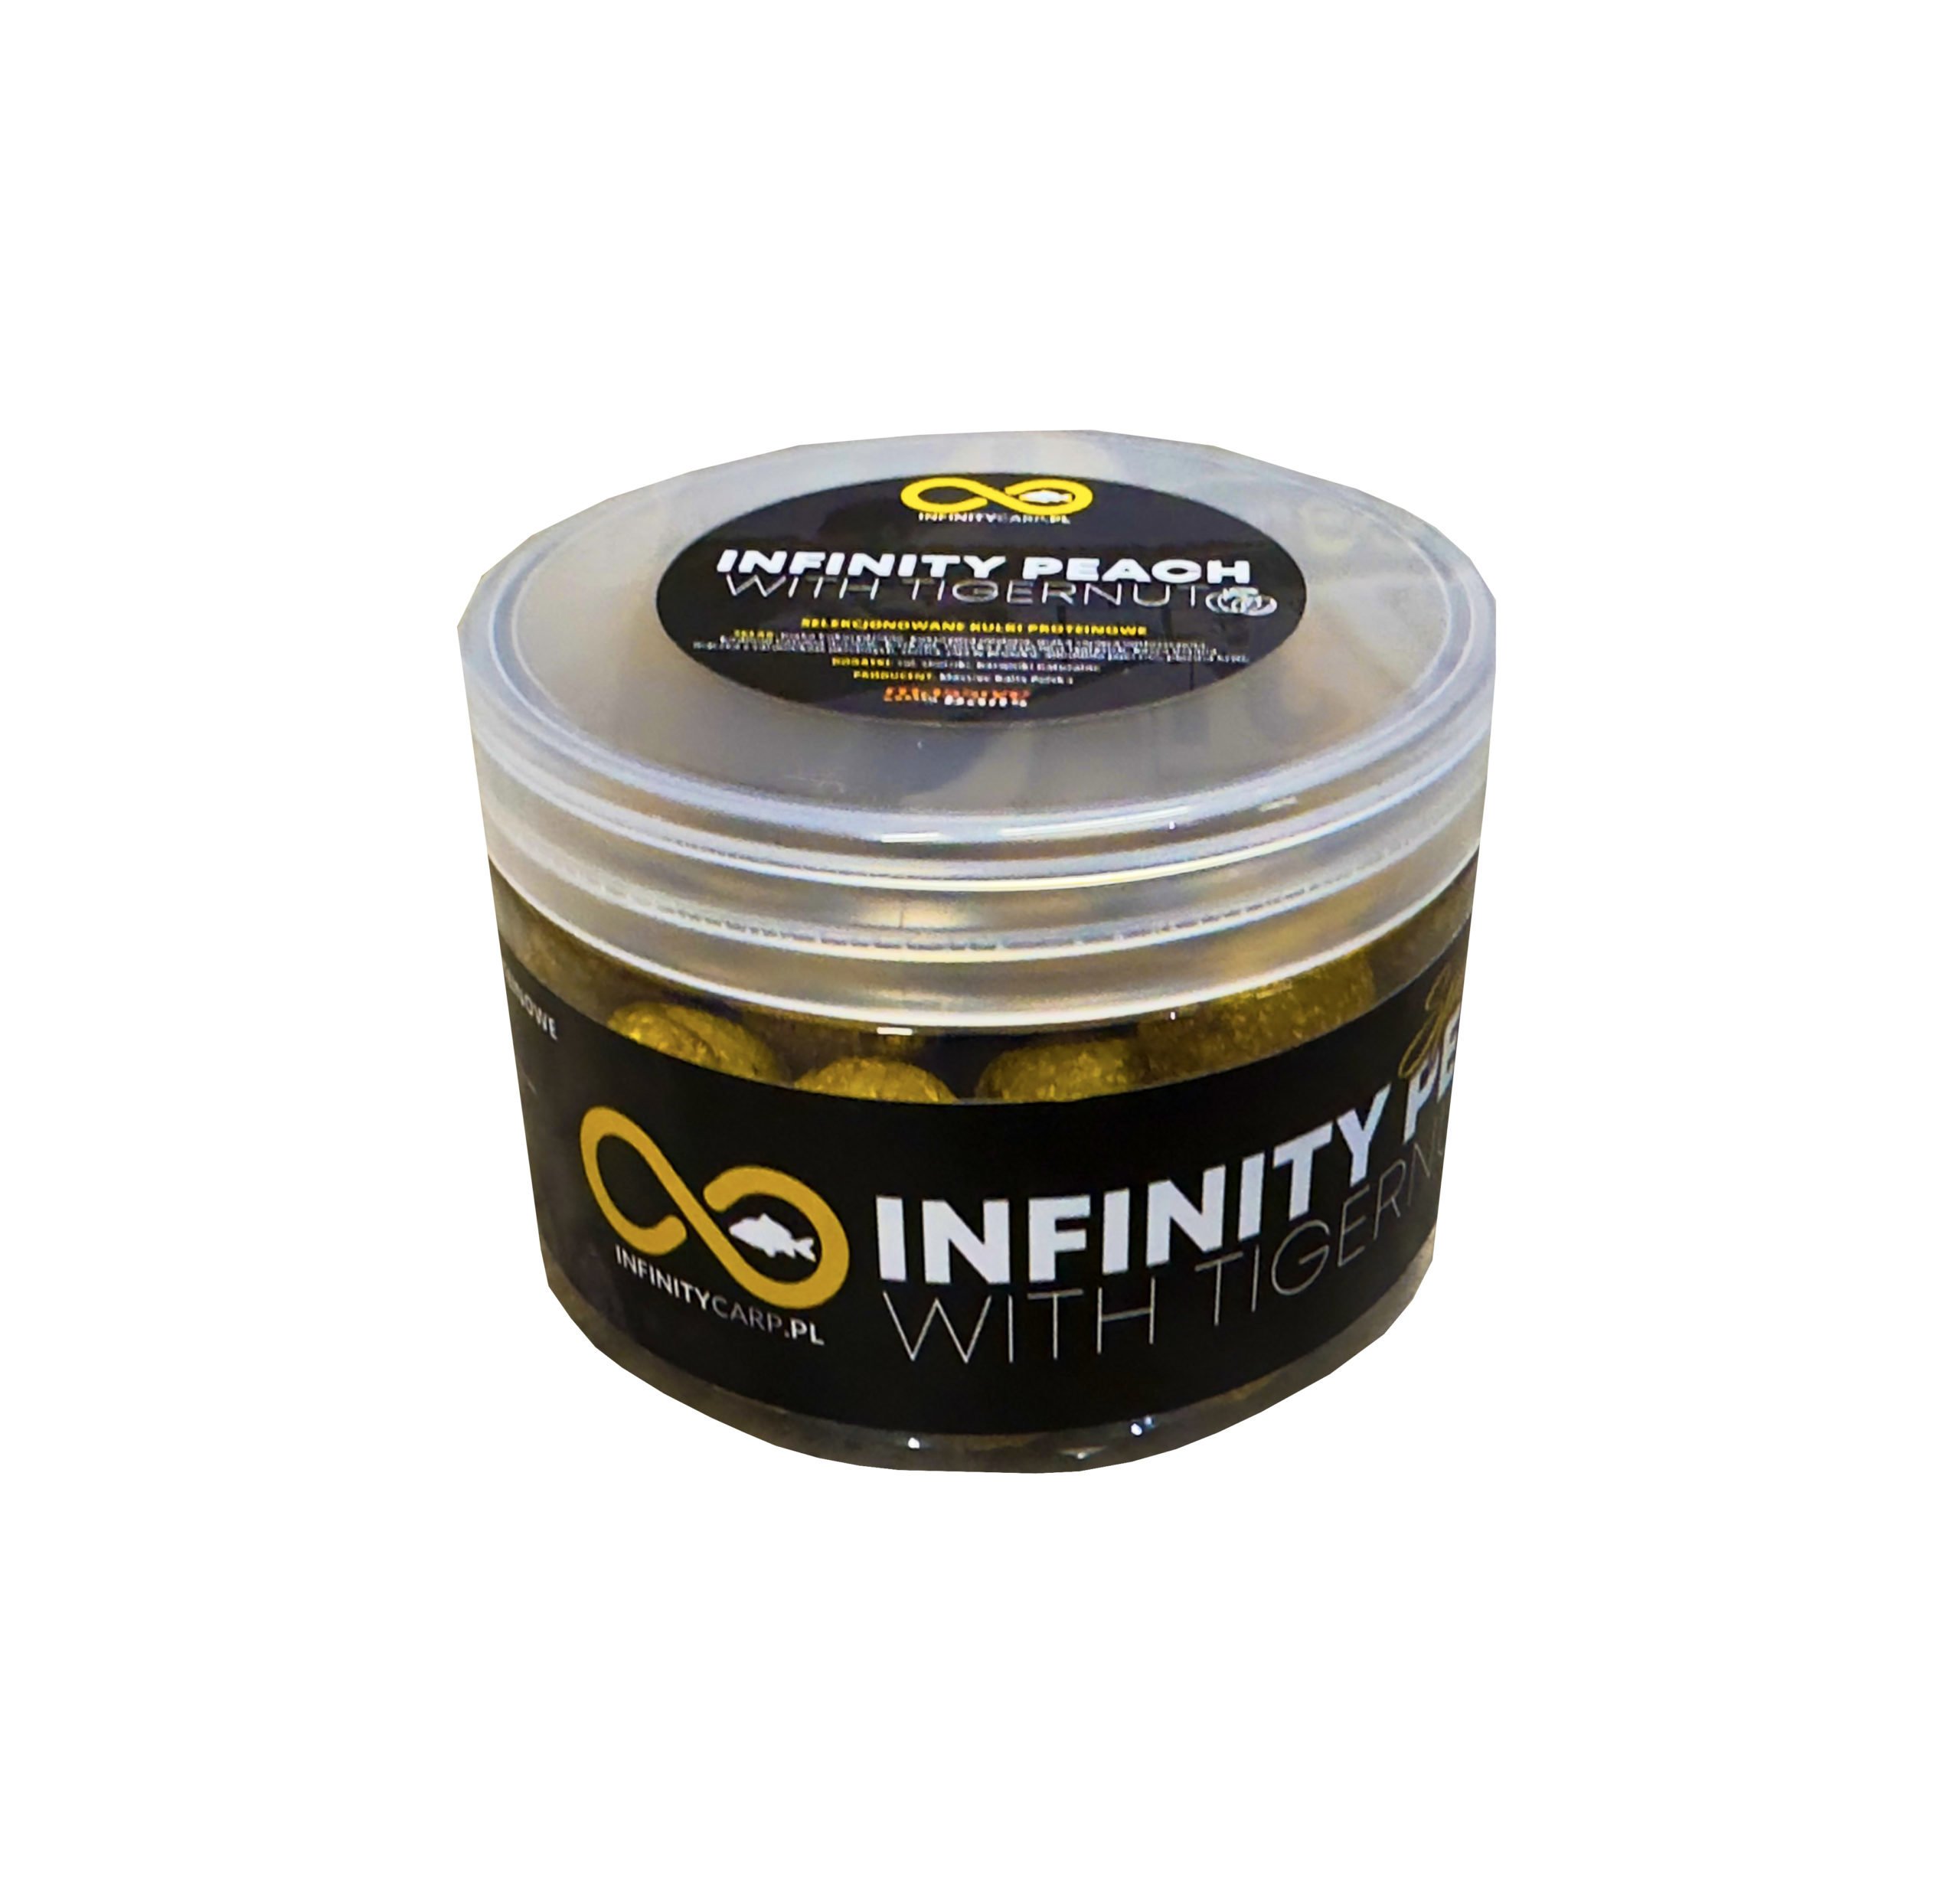 Infinity Peach with Tigernut Limited edition Yellow – CORKERZ (Wafters) 18mm